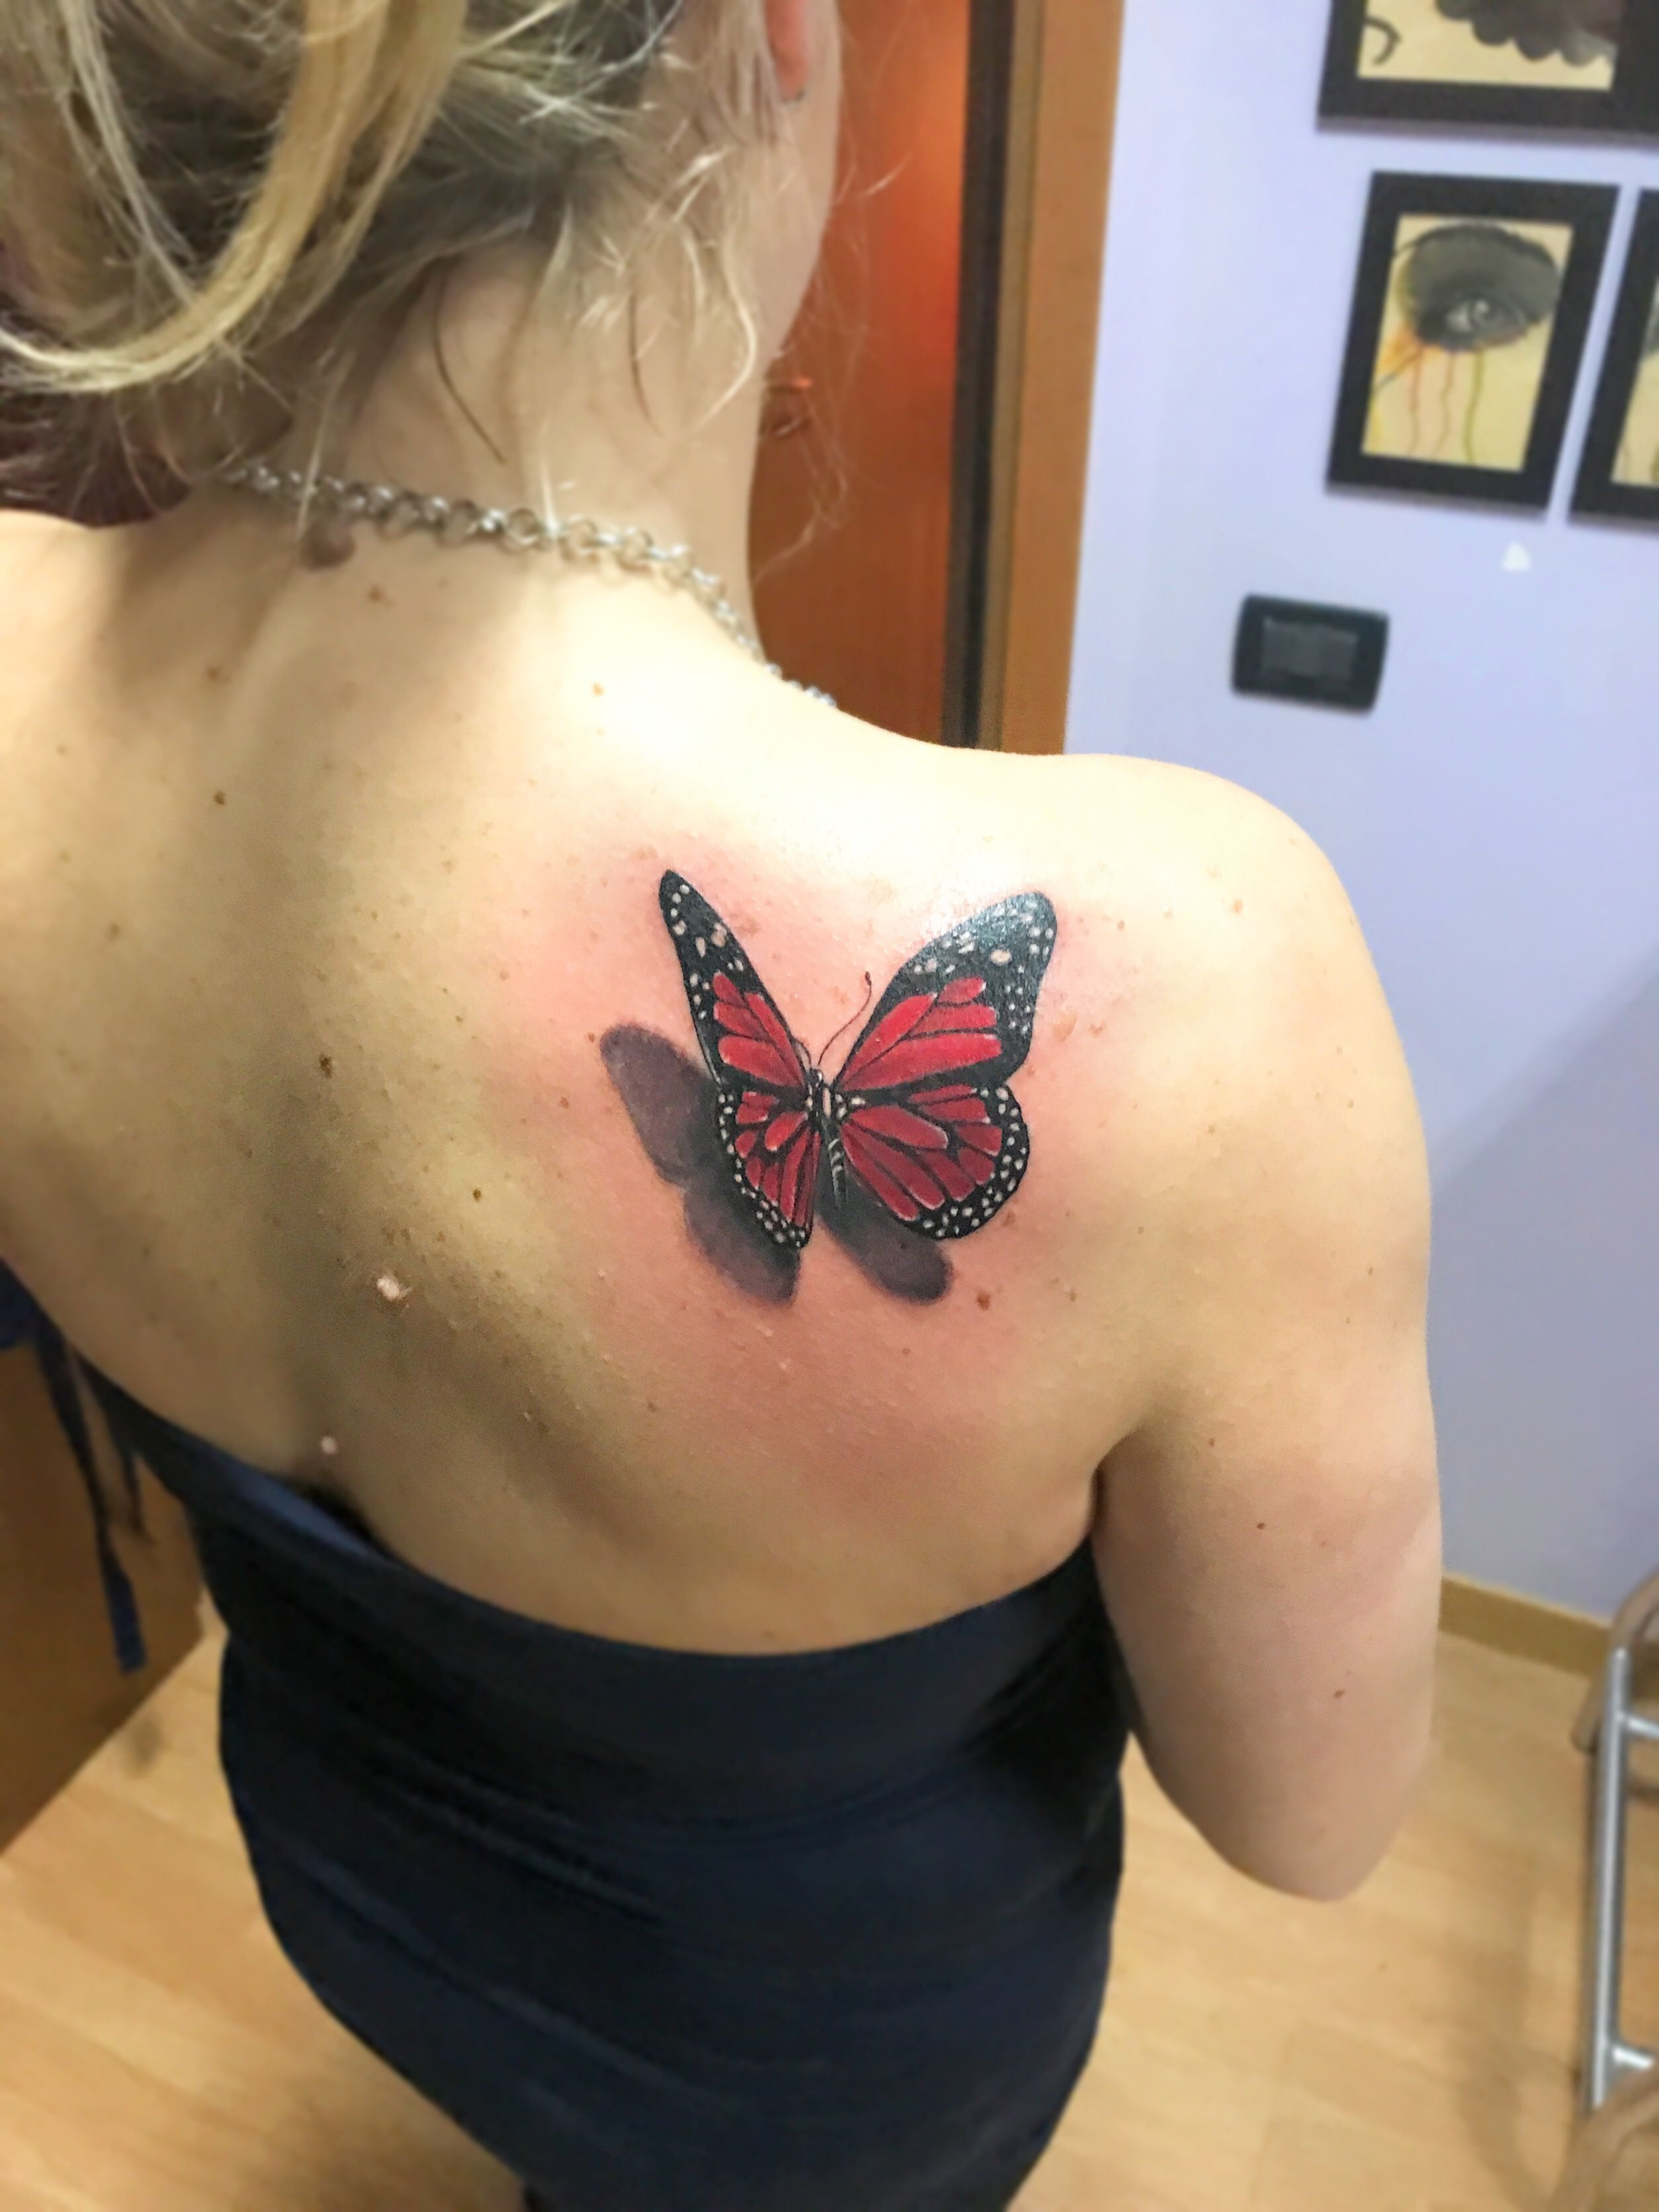 Mta Mtatattoo Butterfly3d Ink Tattoo Red Butterfly Girls Hot intended for measurements 2508 X 3344